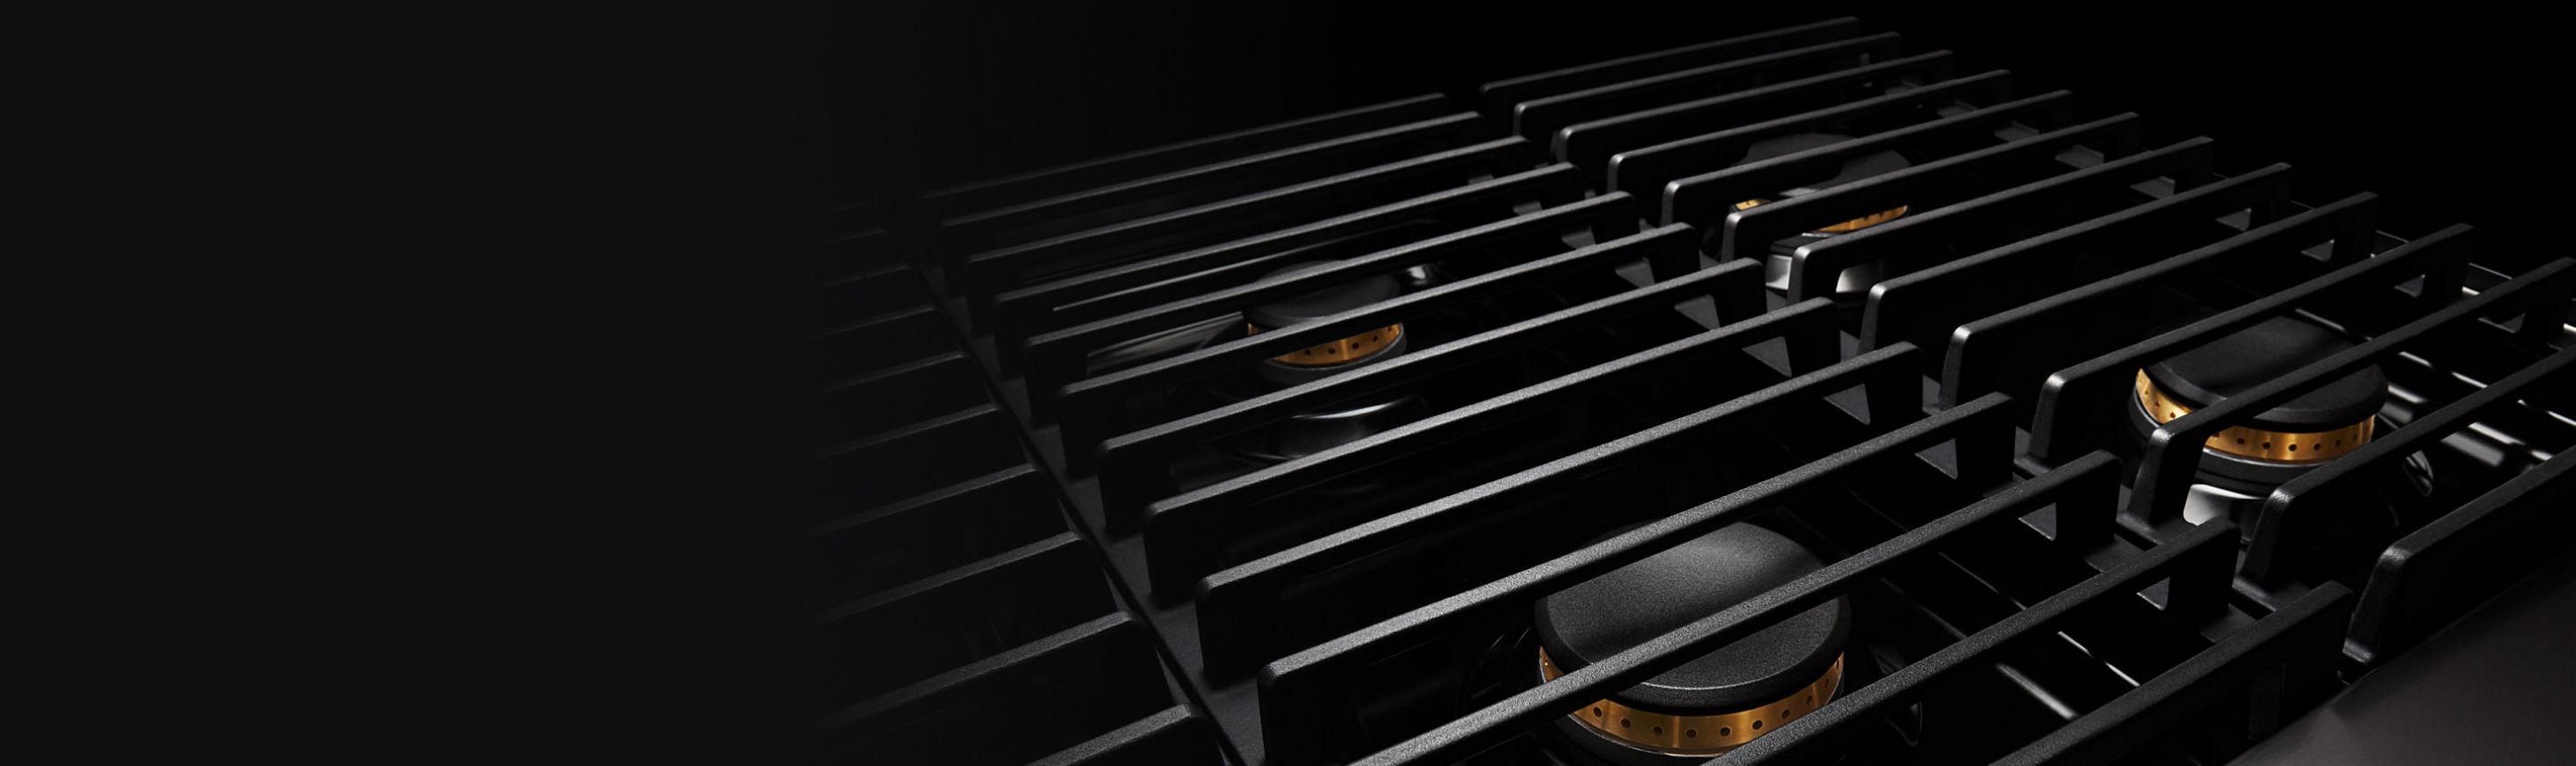 The cast iron grates of professional-style range, with brass detailing.